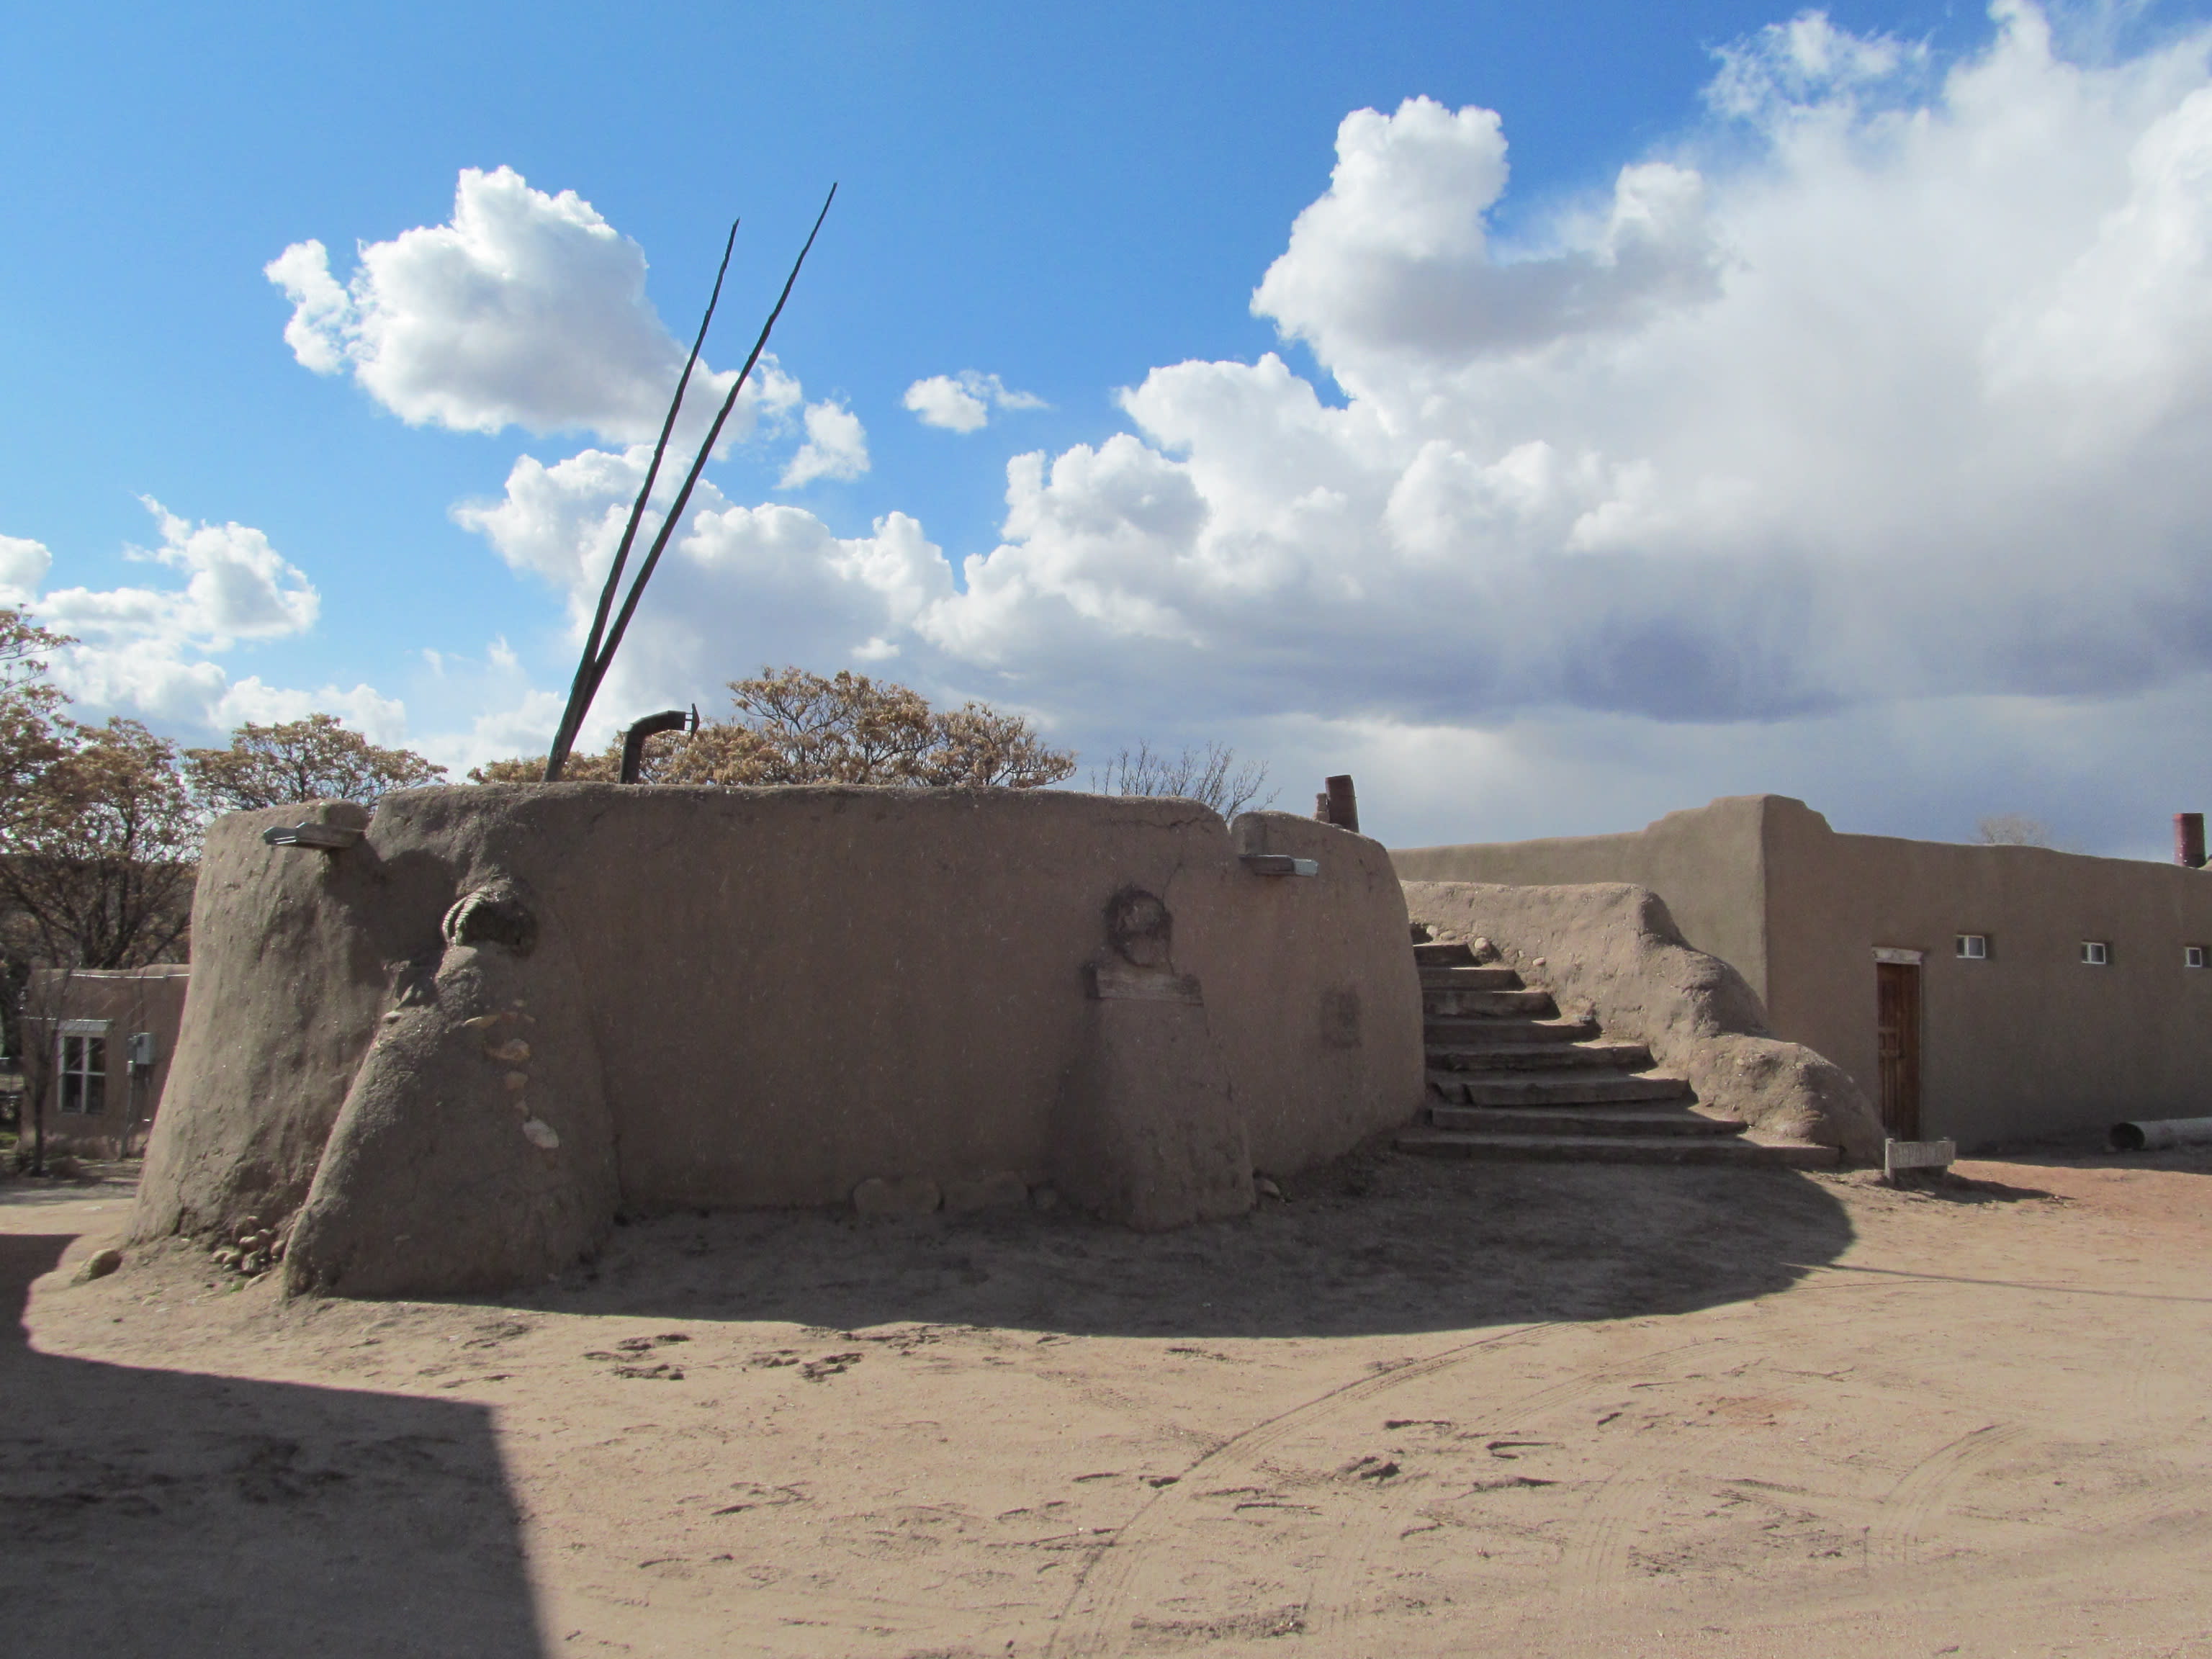 Kivas are a central feature of Pueblo communities, used for ceremonial and/or political gatherings.